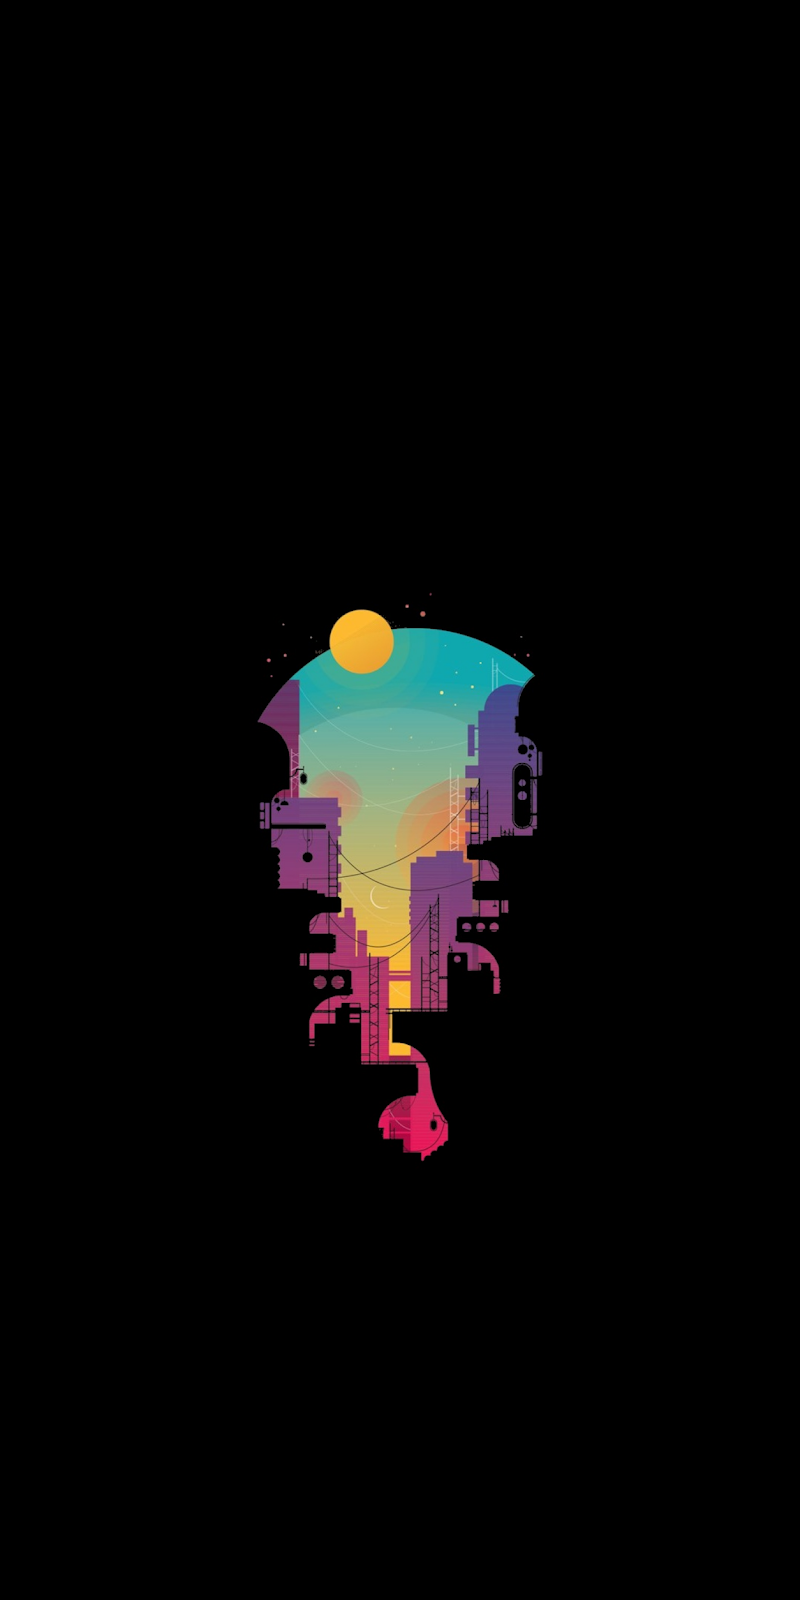 Minimalist City #wallpaper #iphone #android #background. Best iphone wallpaper, Background phone wallpaper, Minimalist wallpaper